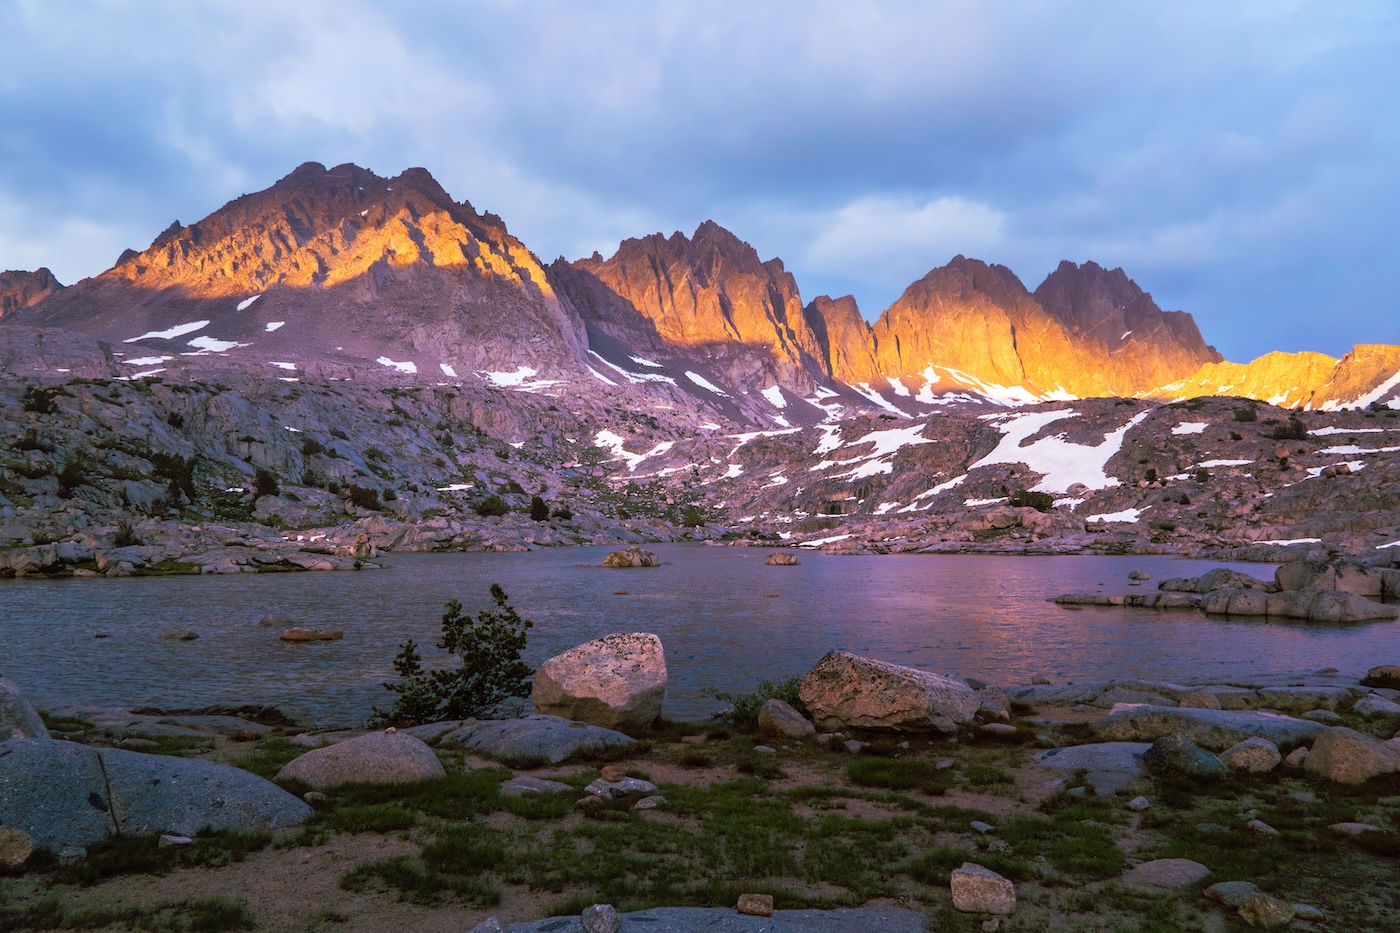 Sun setting at an alpine lake in the Dusy Basin of Kings Canyon National Park in the Sierras